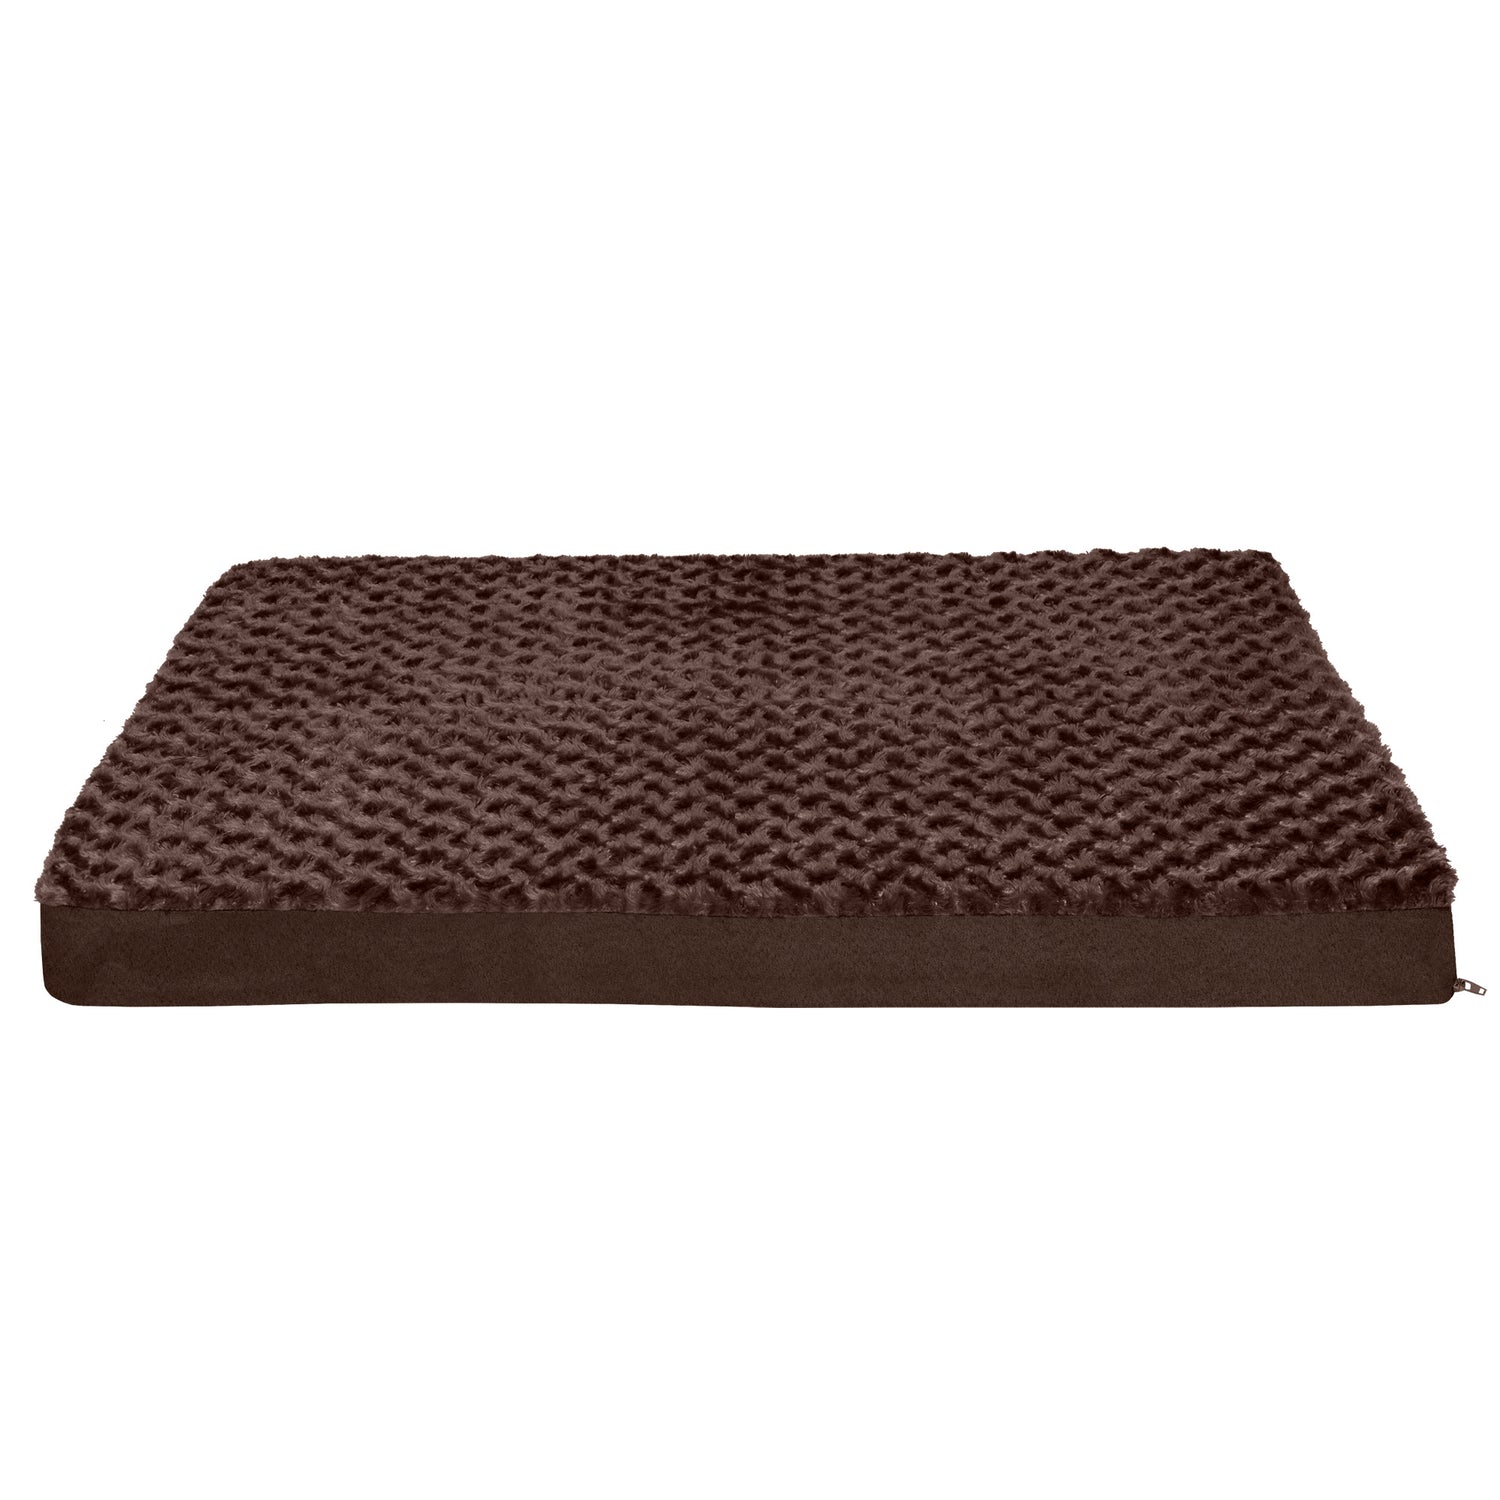 Furhaven Pet Dog Bed | Deluxe Memory Foam Ultra Plush Mattress Pet Bed for Dogs & Cats, Chocolate, Large